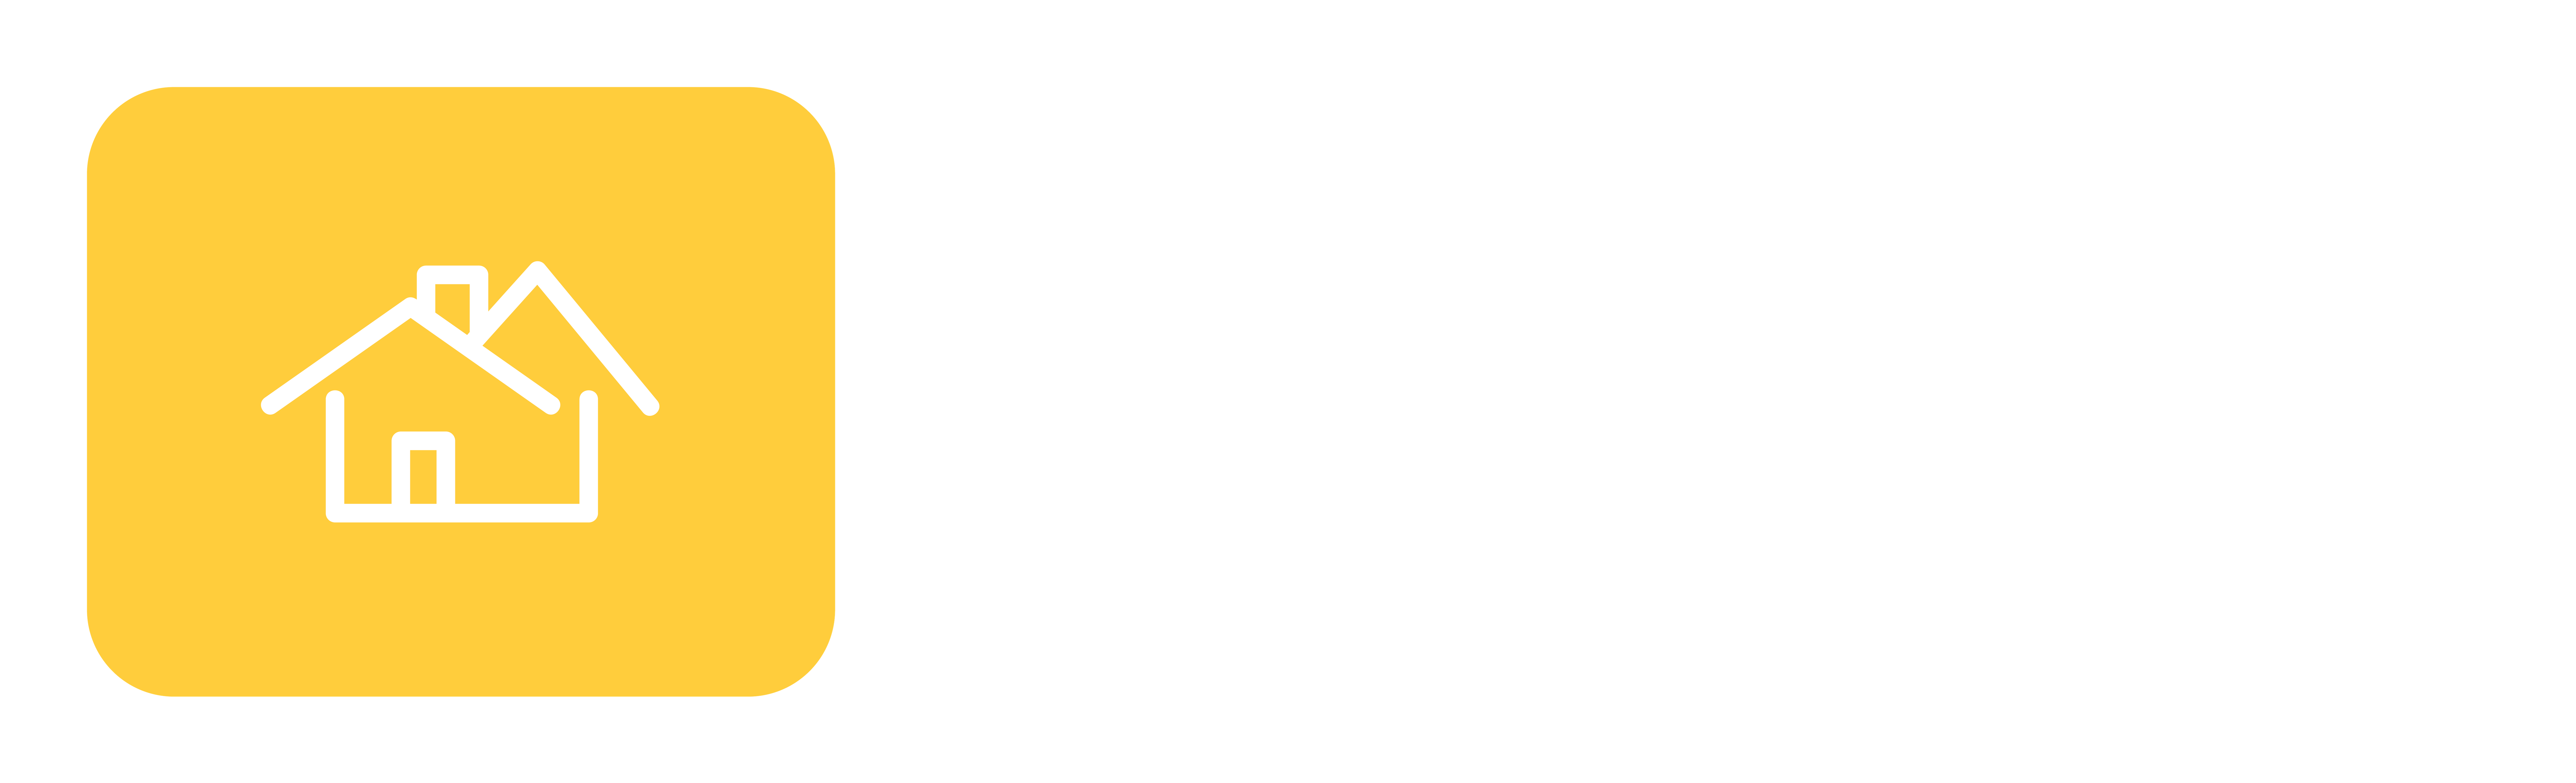 Agnes Water Hardware